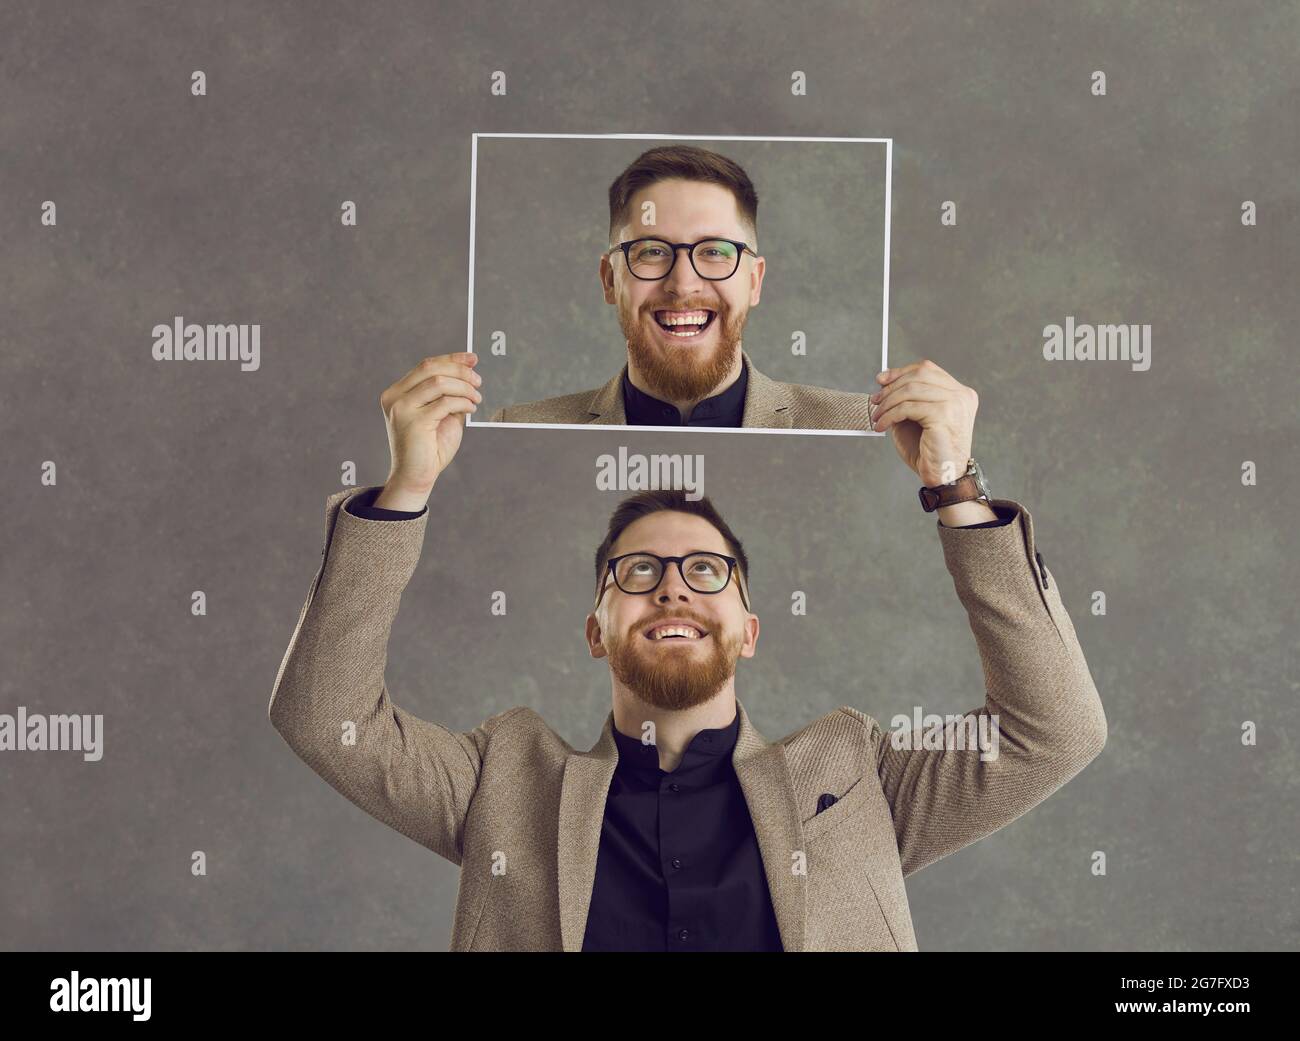 Happy smiling man holding a photo of himself laughing isolated on a grey background Stock Photo